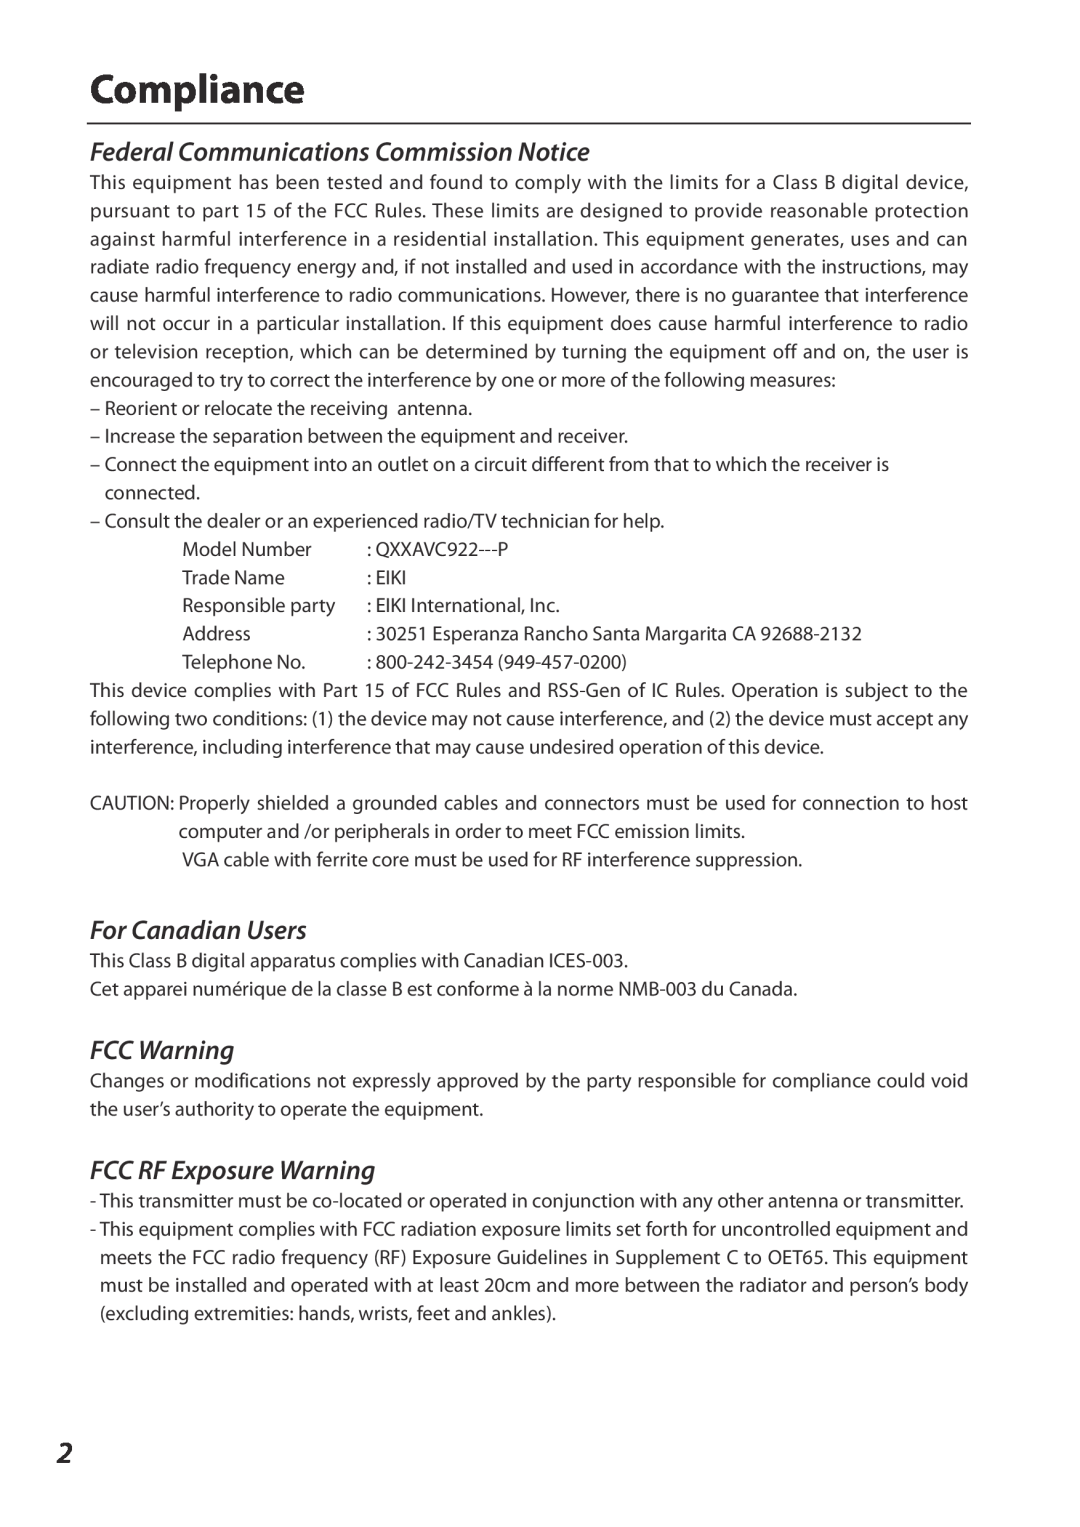 Eiki QXXAVC922---P owner manual Compliance, Federal Communications Commission Notice, For Canadian Users, FCC Warning 